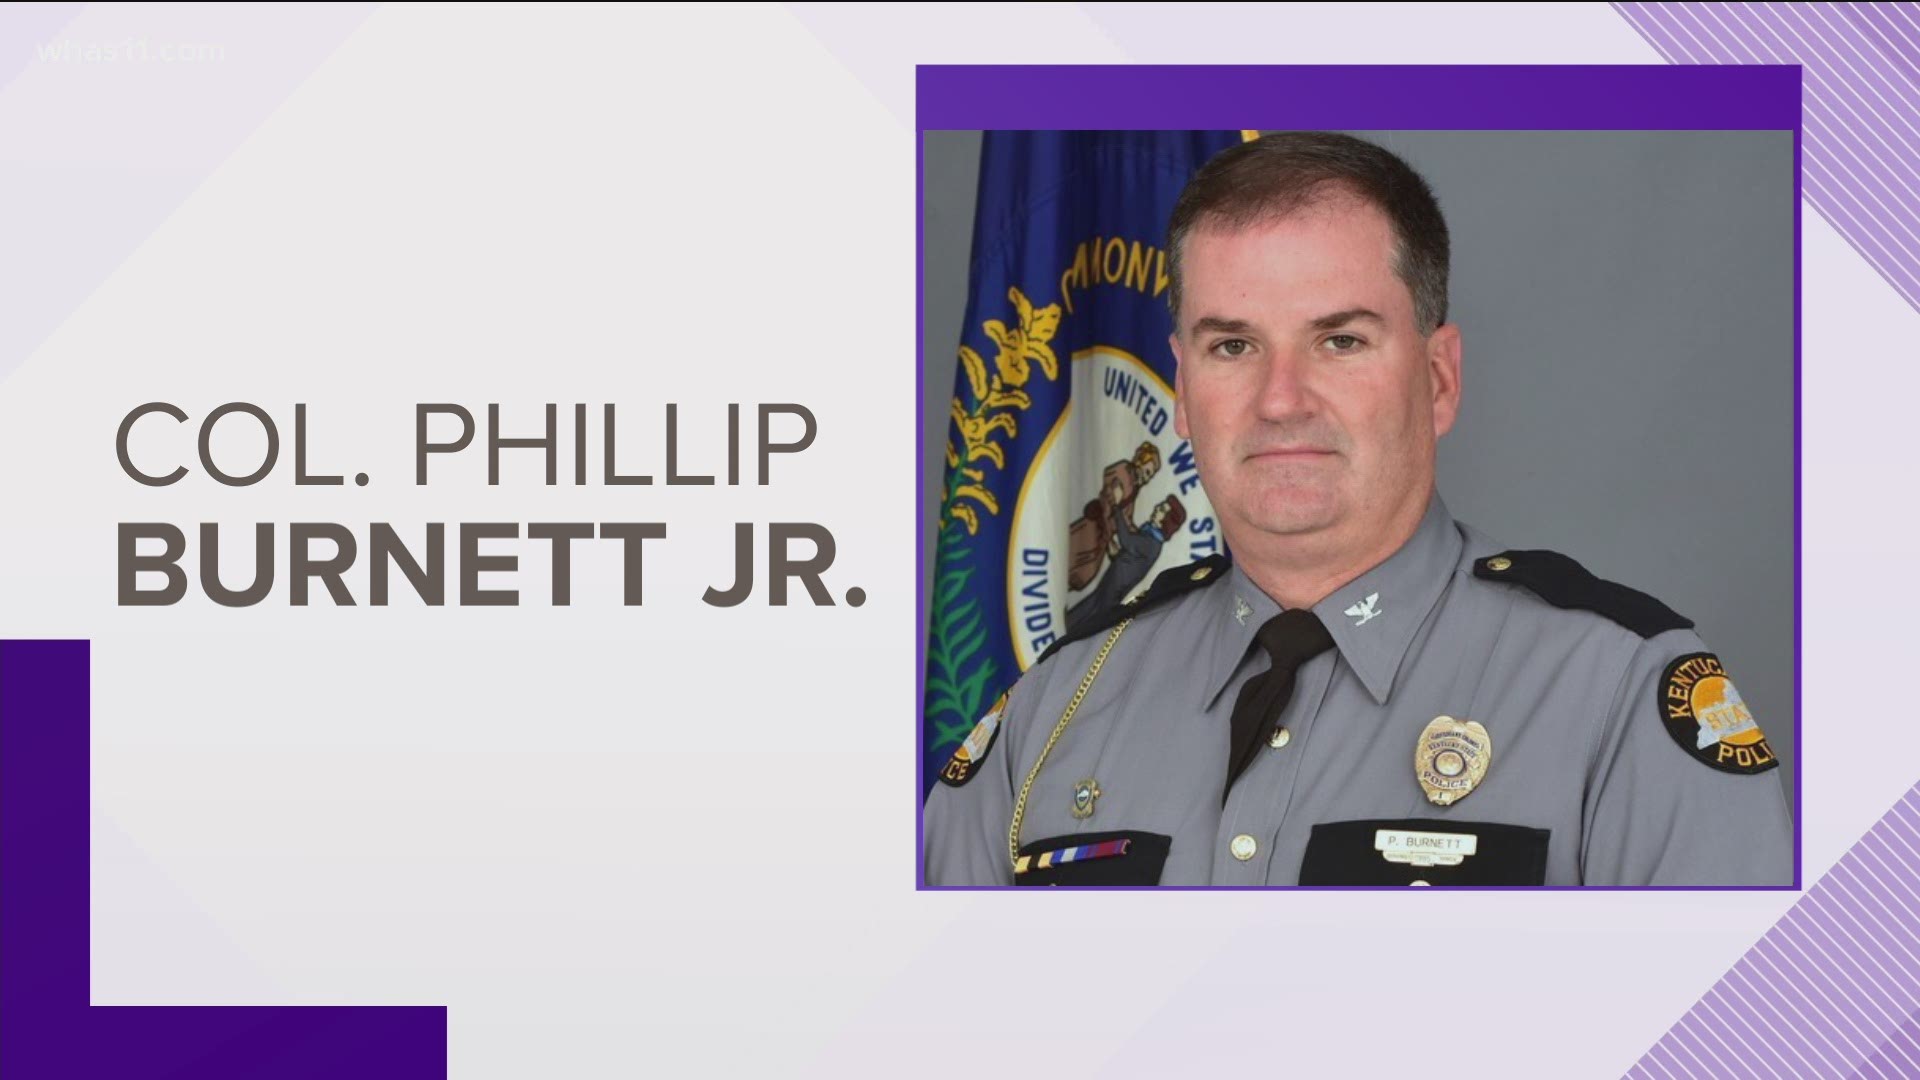 Burnett, a Bell County native, has served as KSP interim commissioner since November 2020 and is a 25-year veteran on the force.